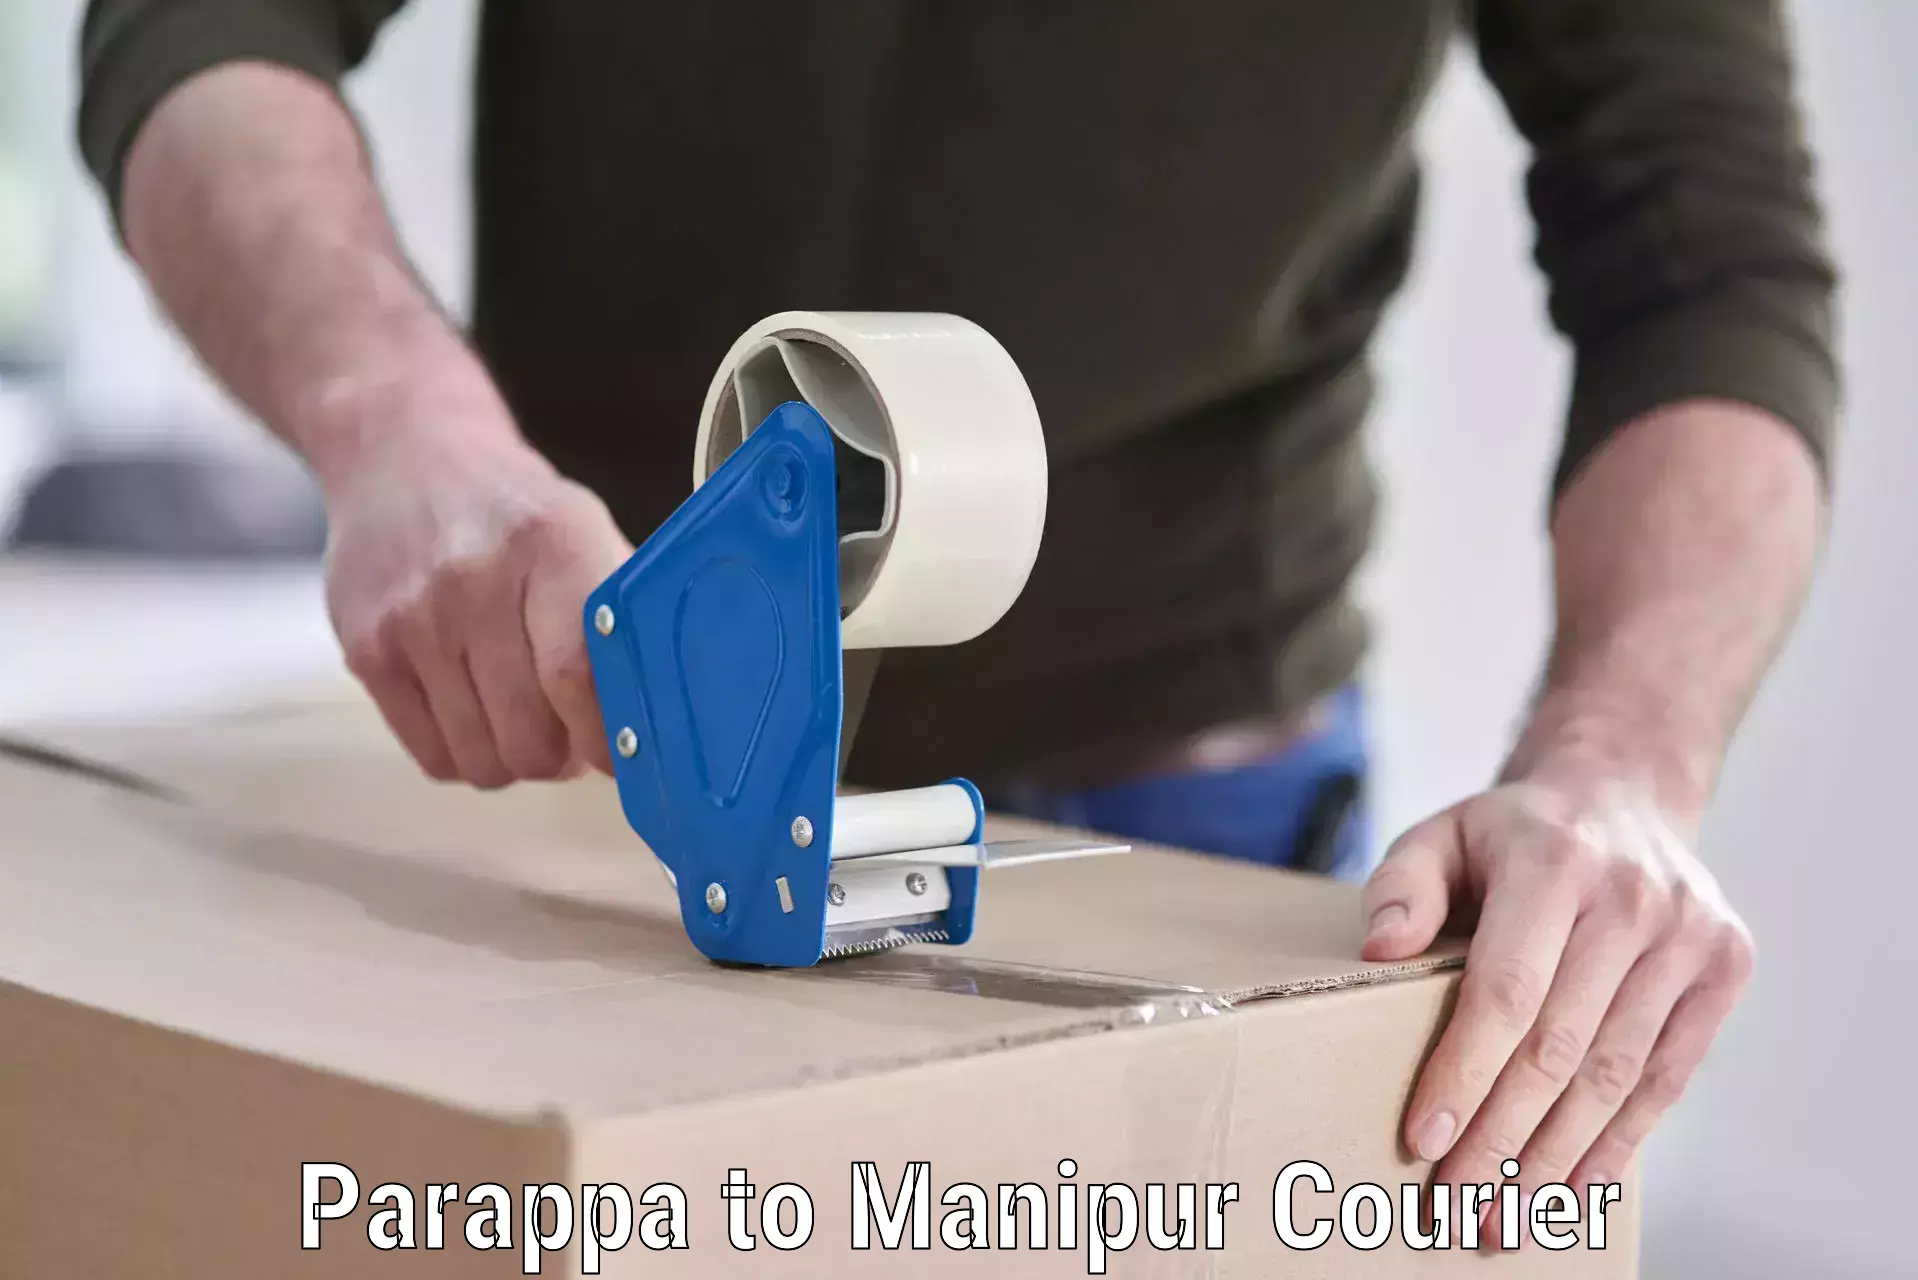 Efficient moving company in Parappa to Manipur